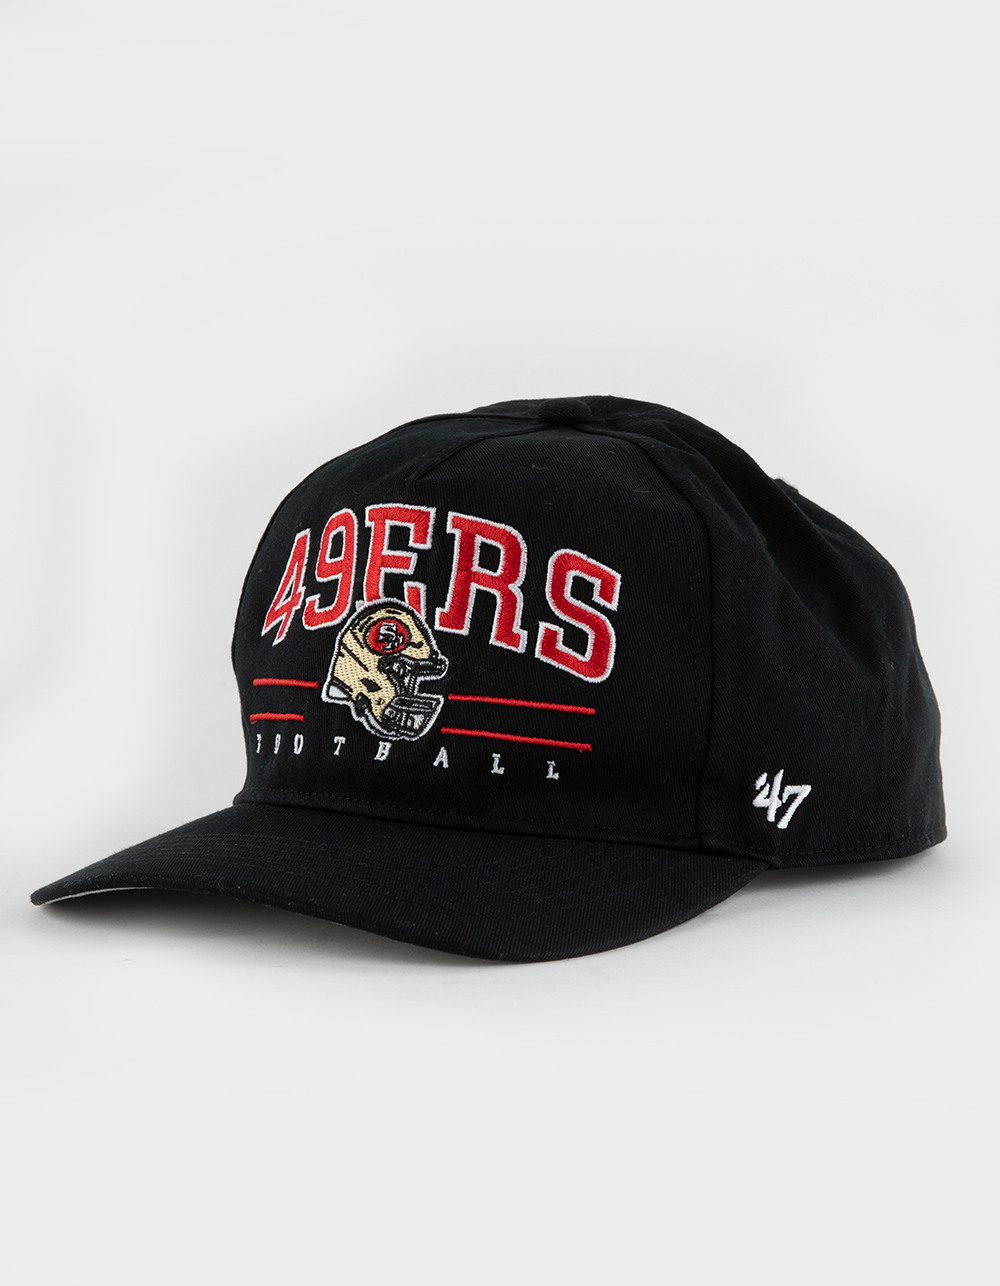 47 Brand Hats  TOPPERZSTORE.COM